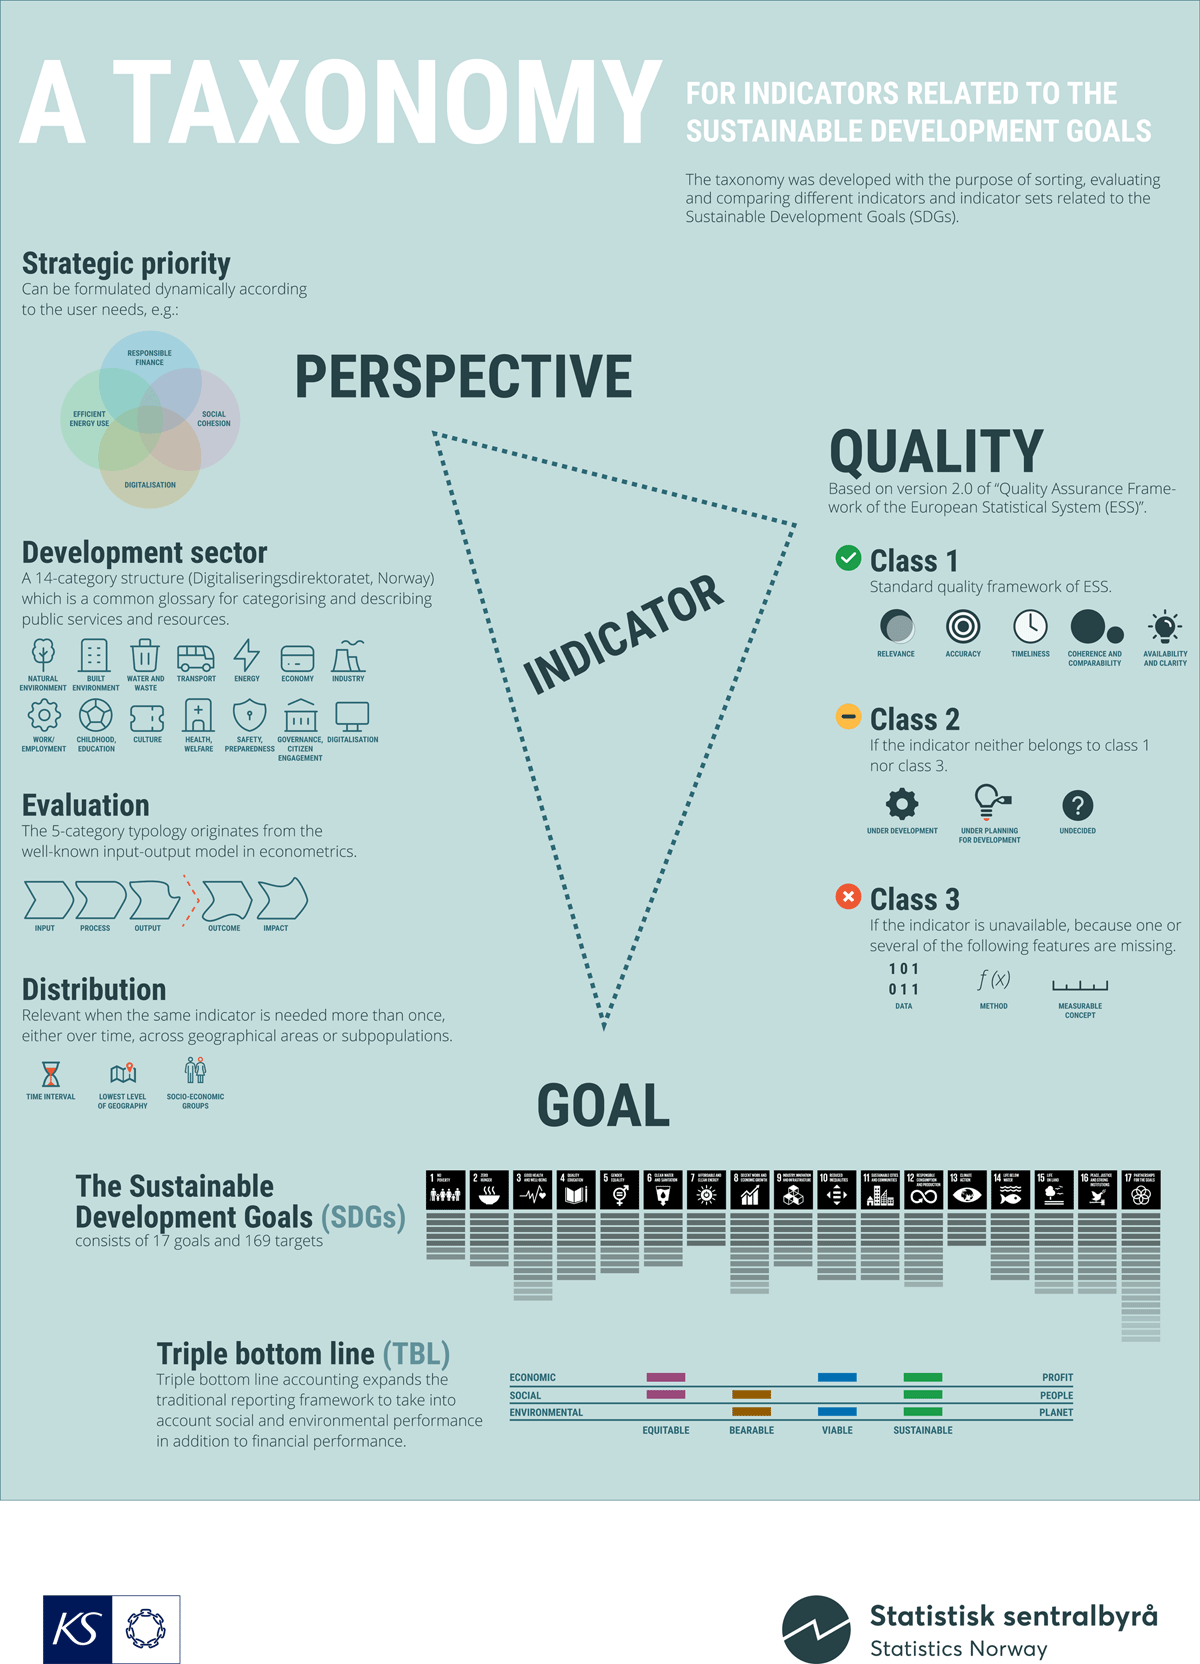 Infographic showing the dimensions and categories of the taxonomy